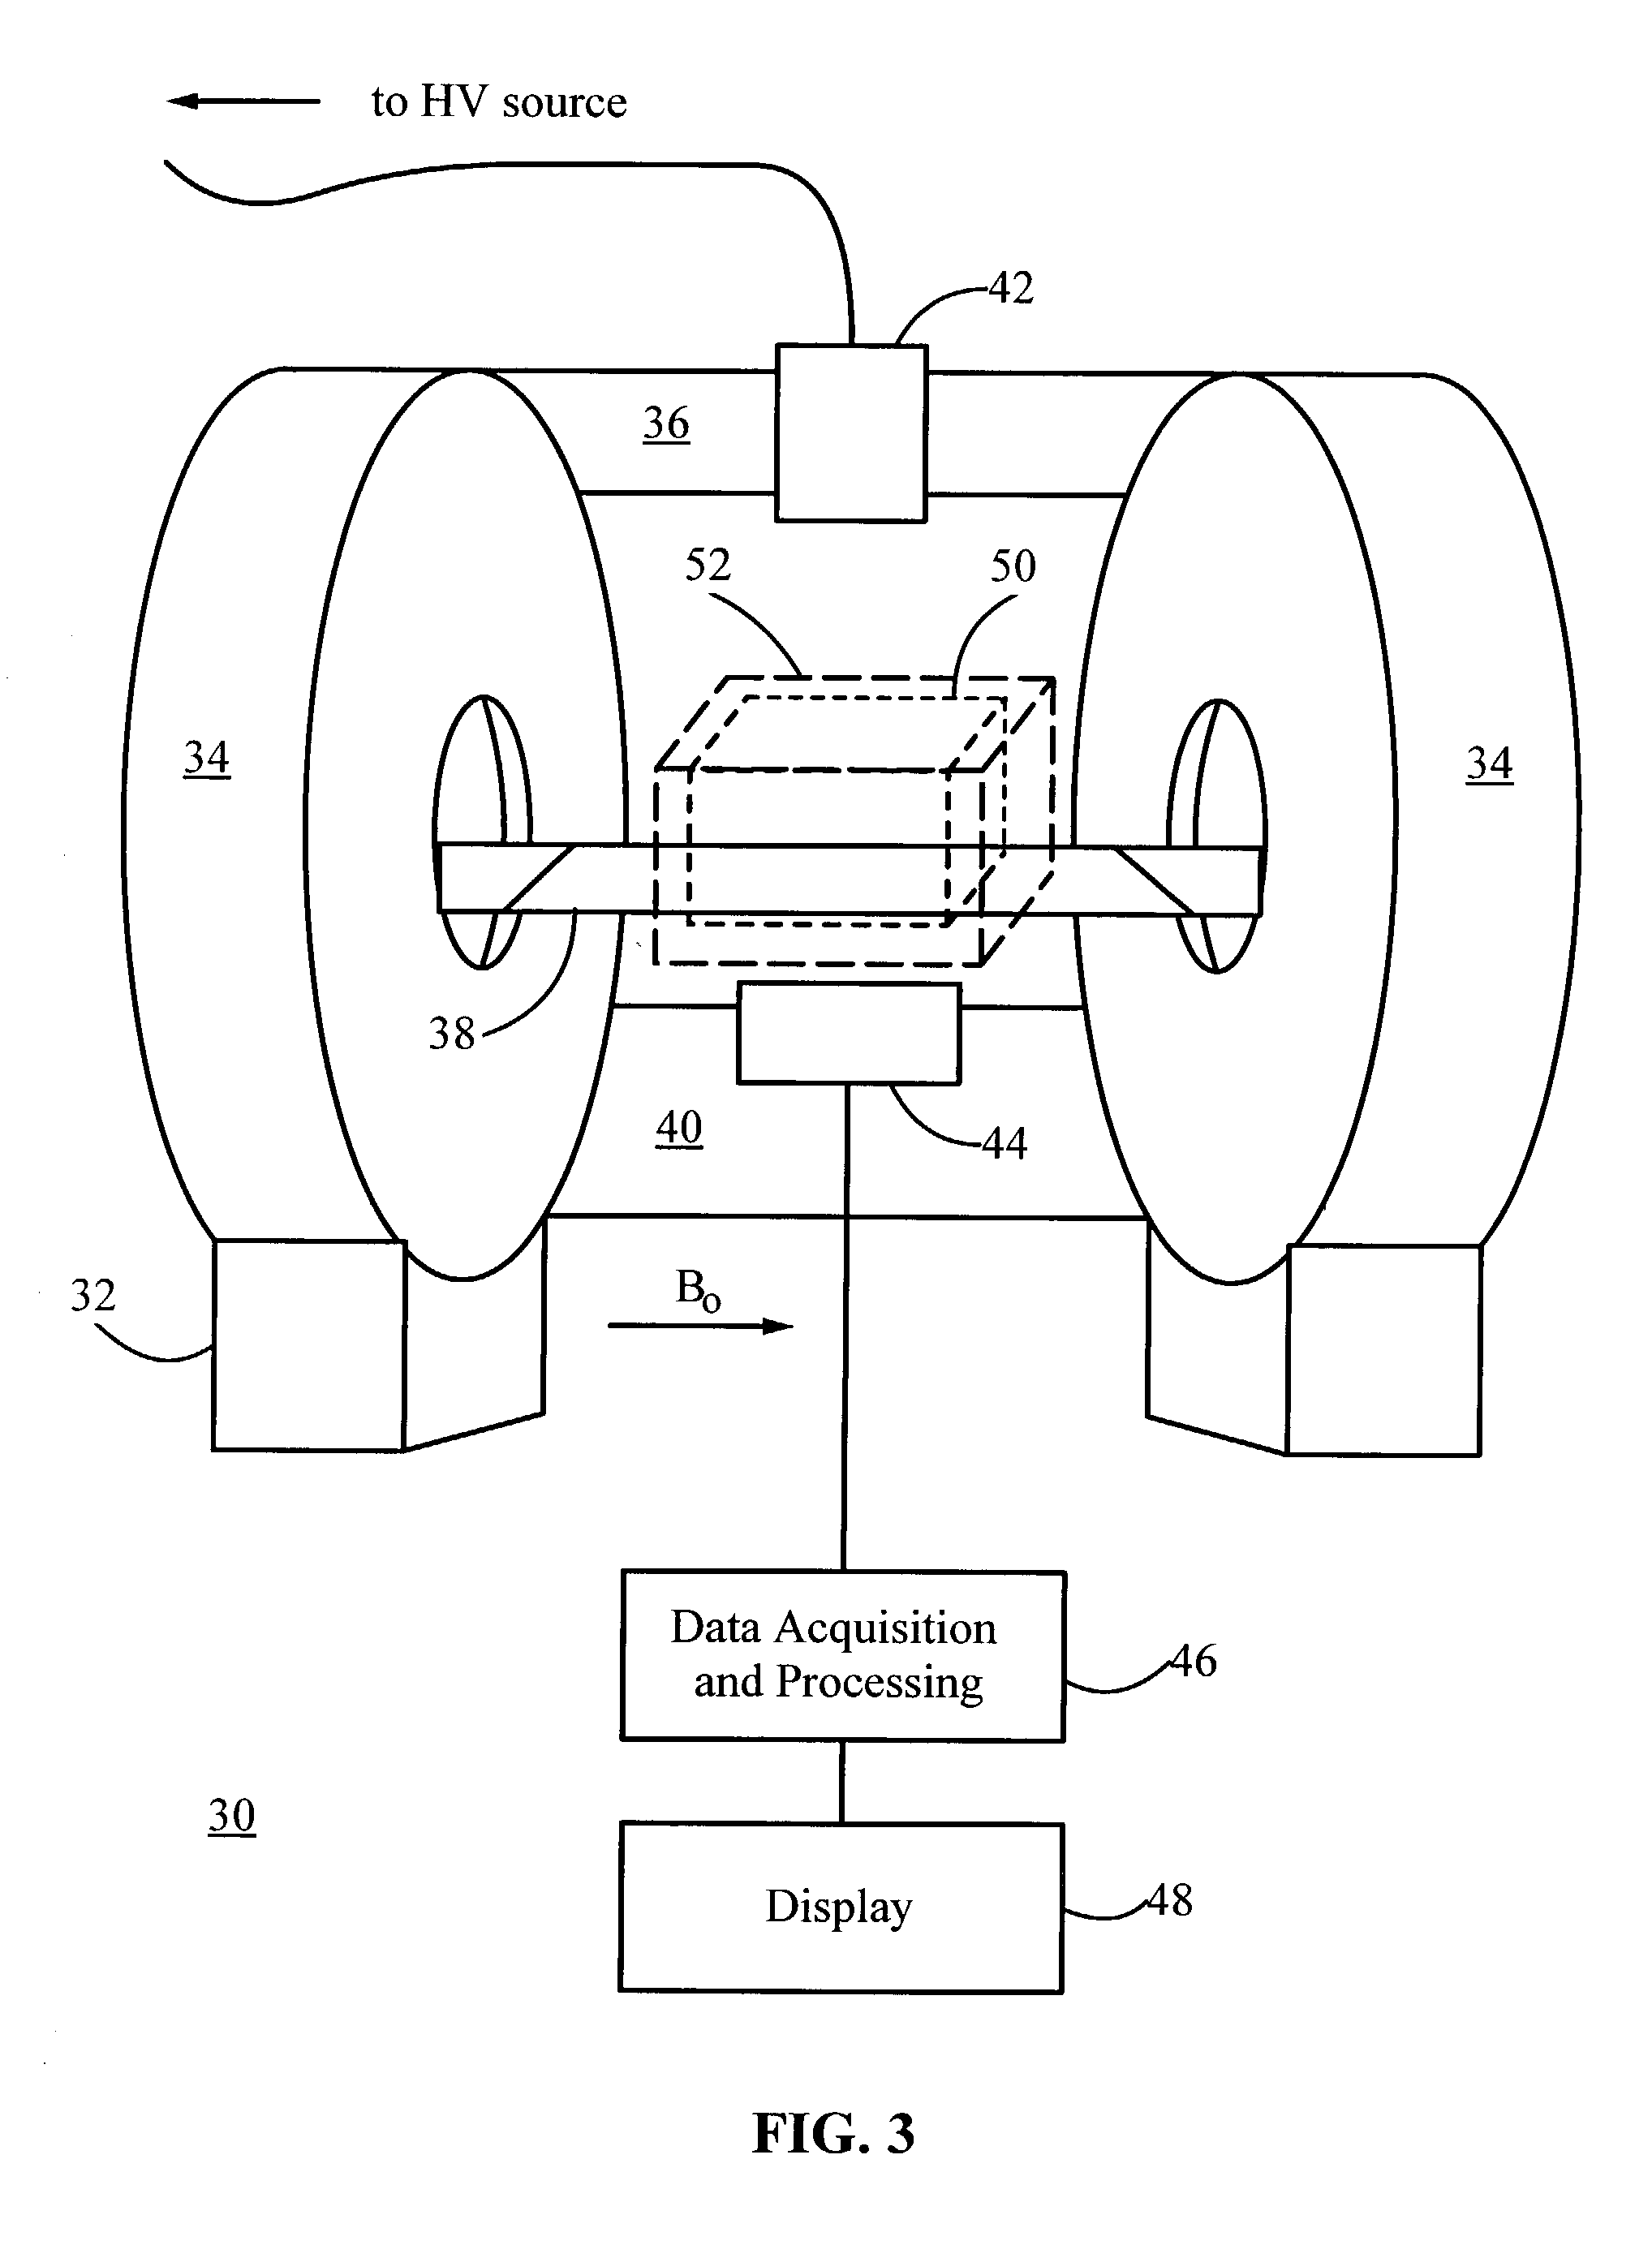 Maintaining the alignment of electric and magnetic fields in an x-ray tube operated in a magnetic field